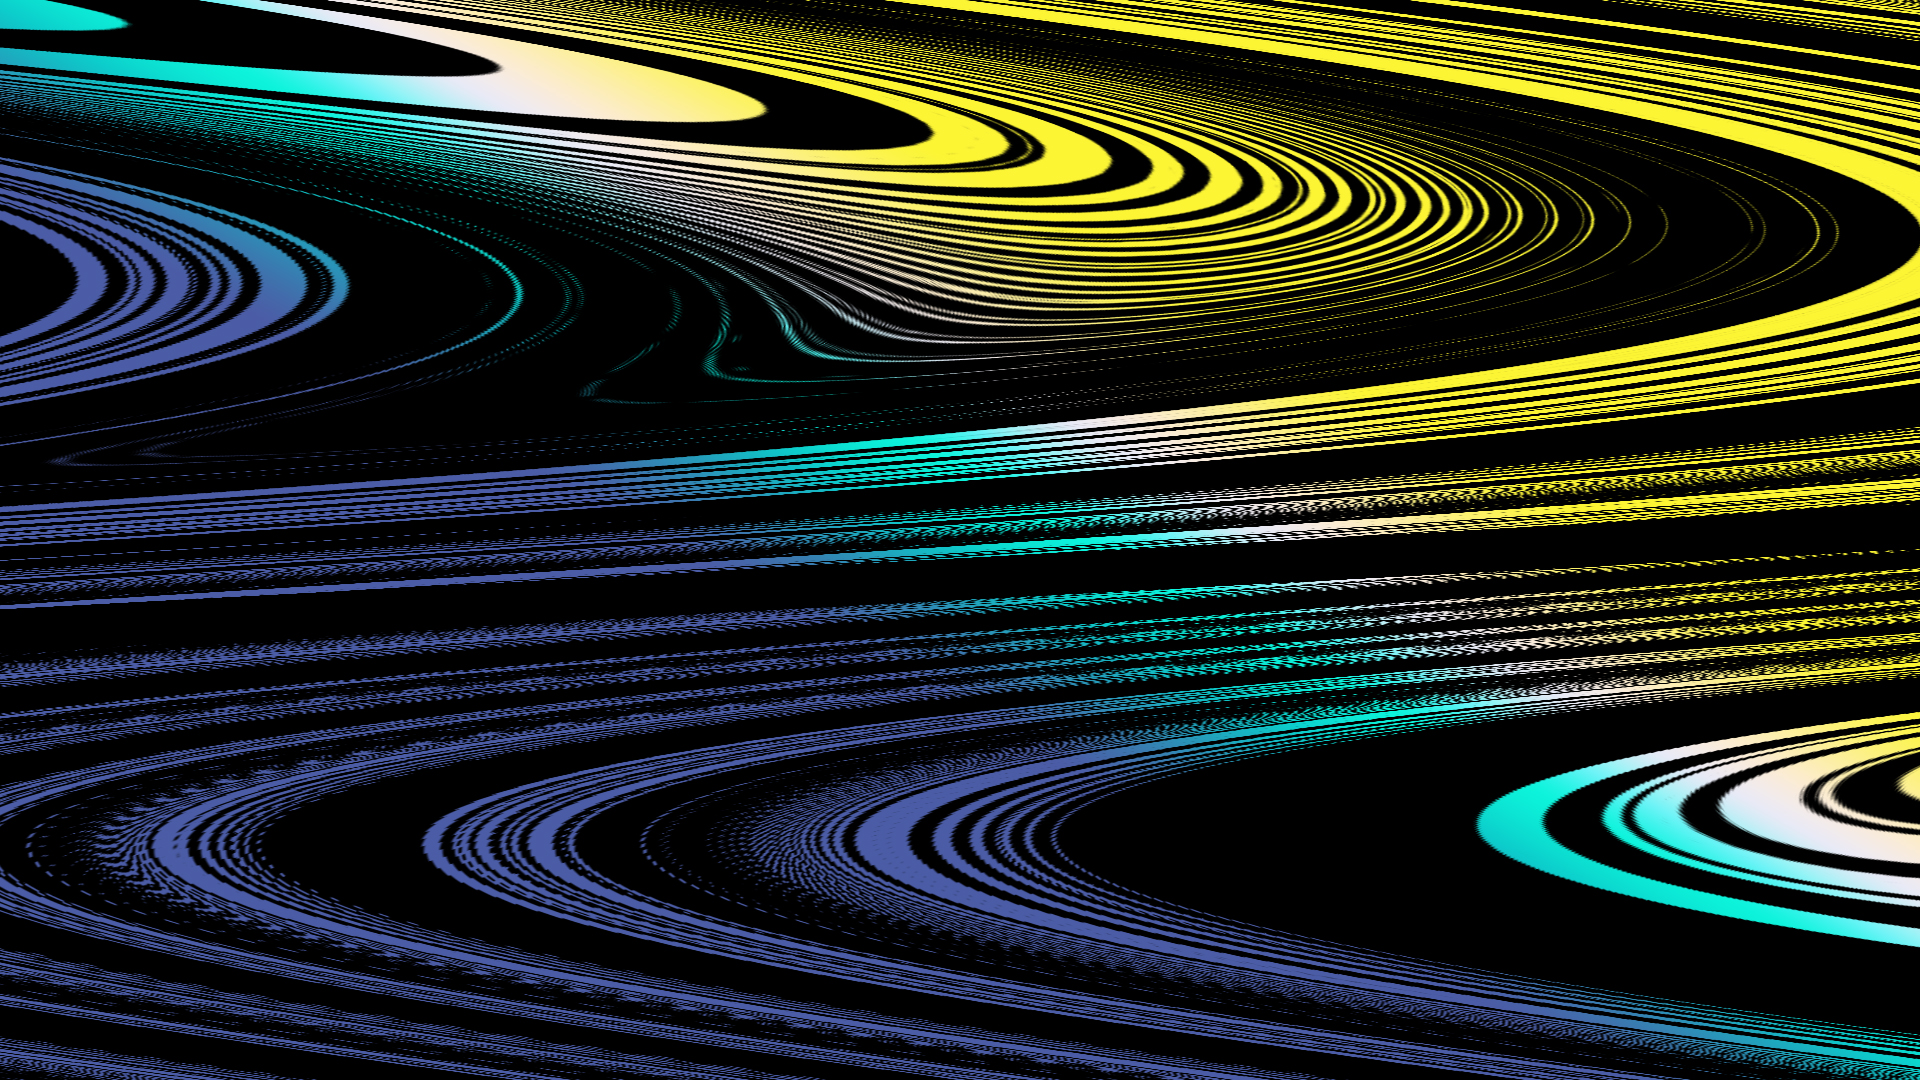 Abstract Artistic Colorful Colors Curves Digital Art 1920x1080